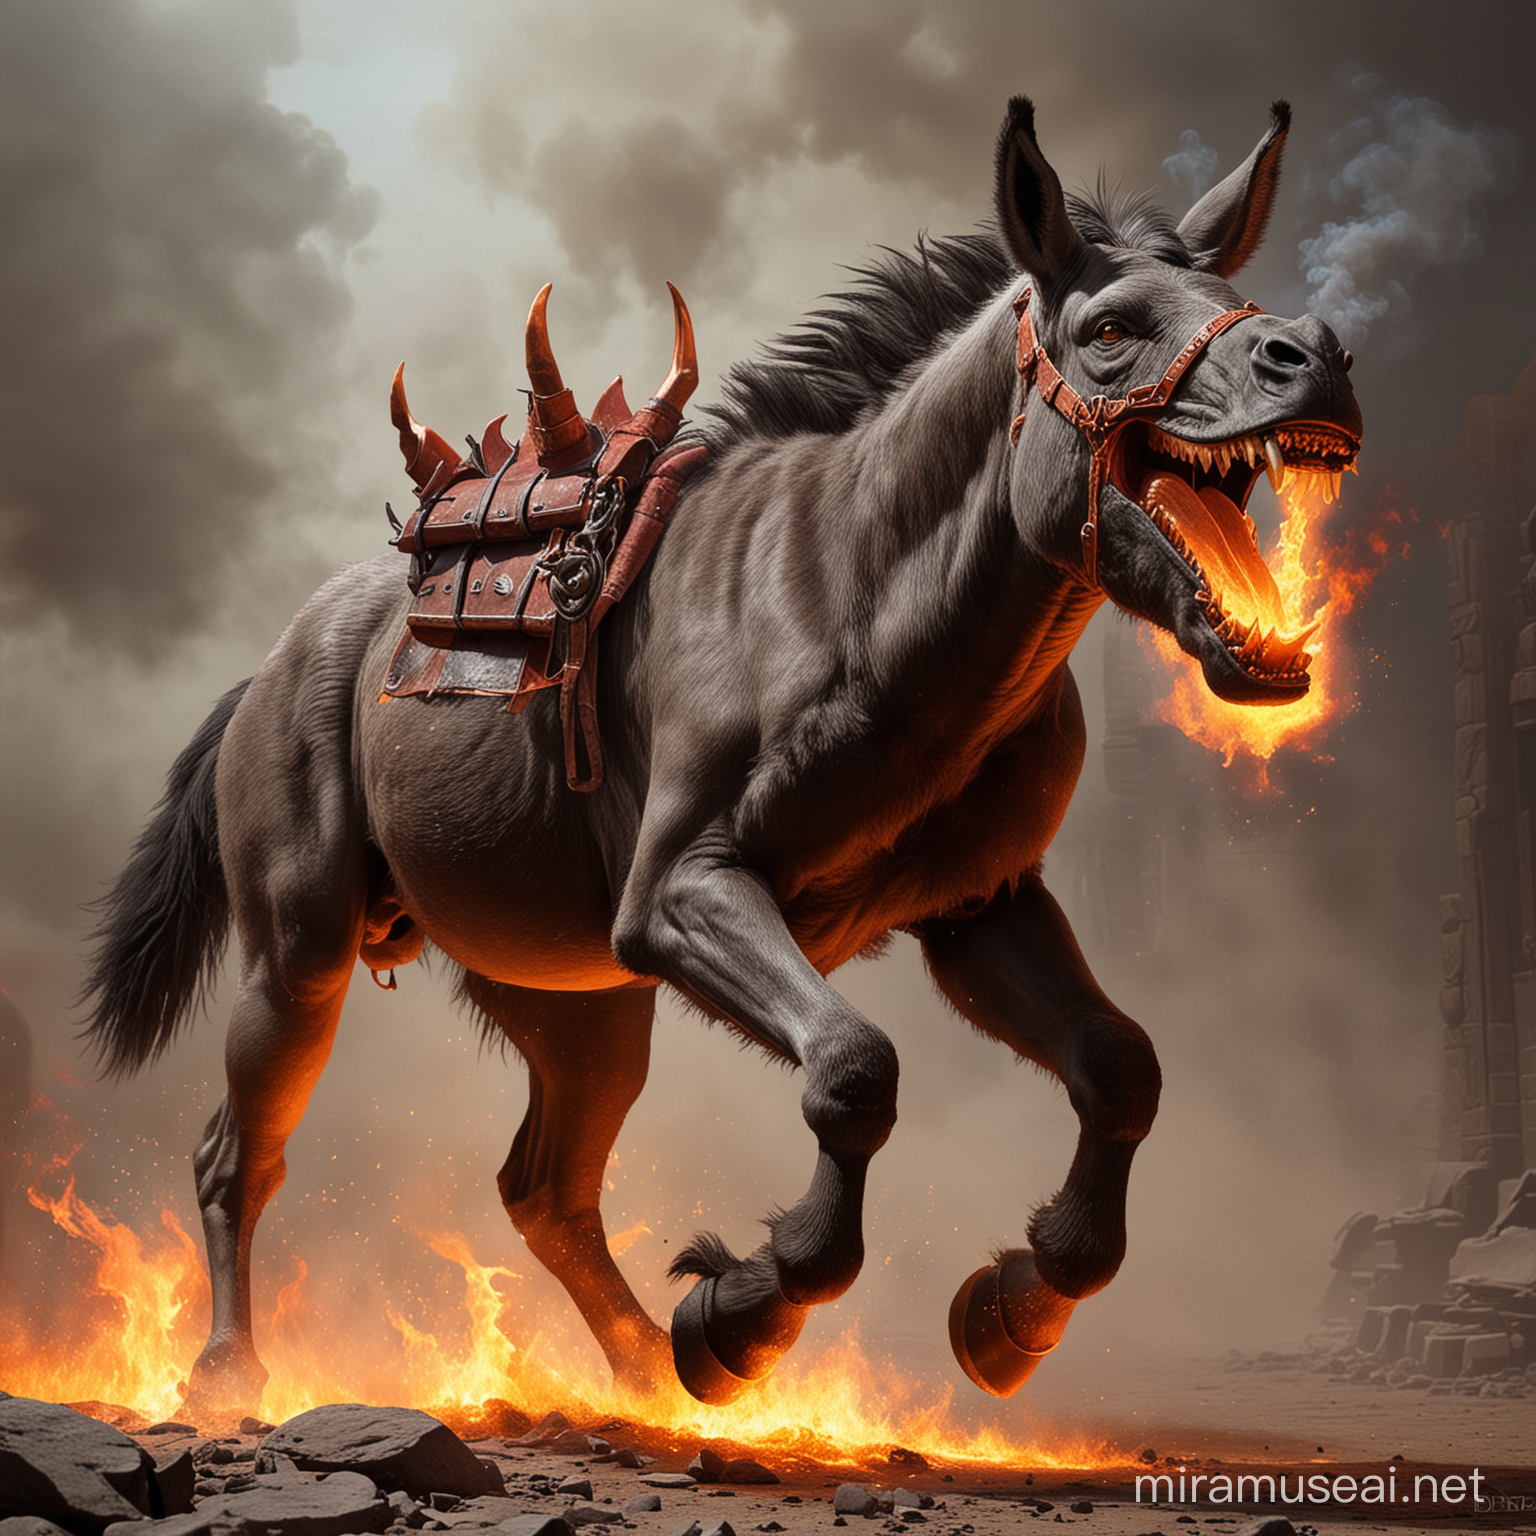 Fantasy Art Evil FireSpitting Donkey with Fiery Hooves